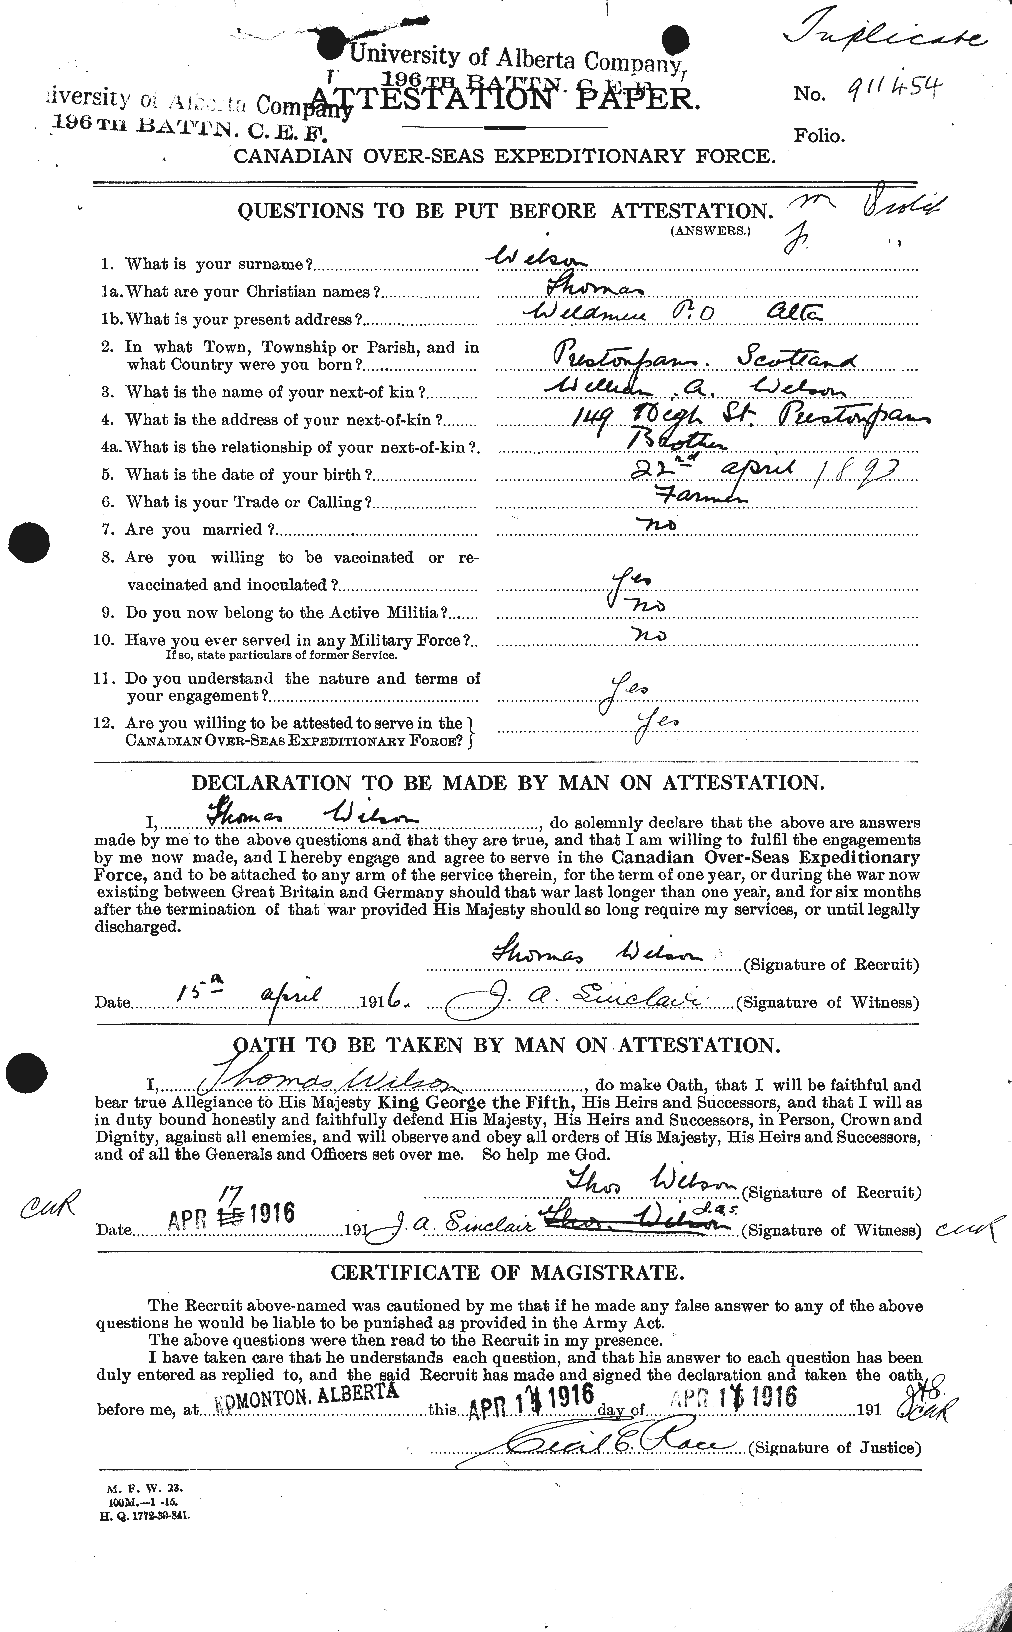 Personnel Records of the First World War - CEF 681219a